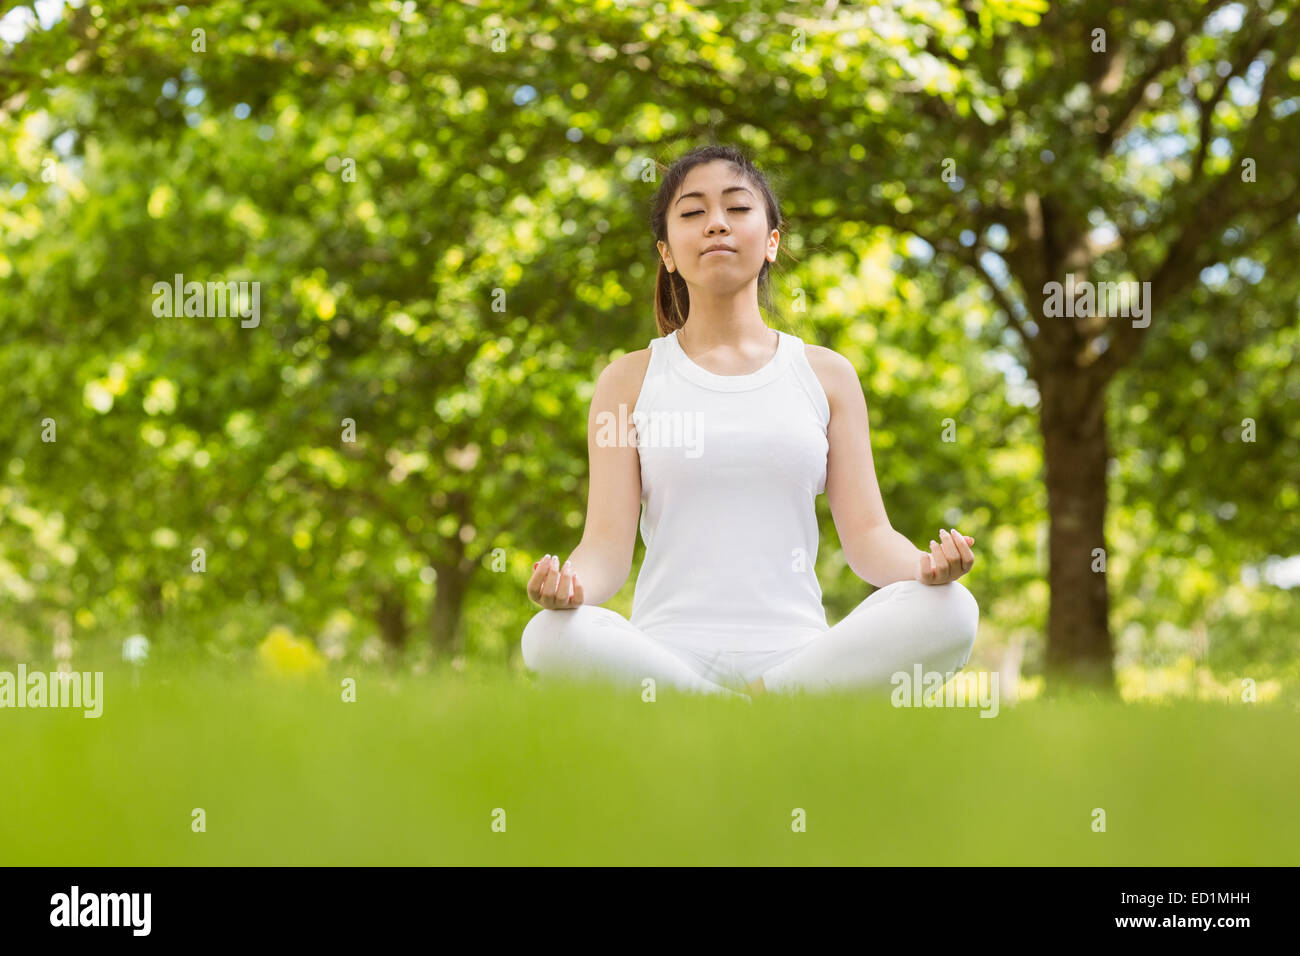 Healthy young woman sitting in lotus pose at park Stock Photo